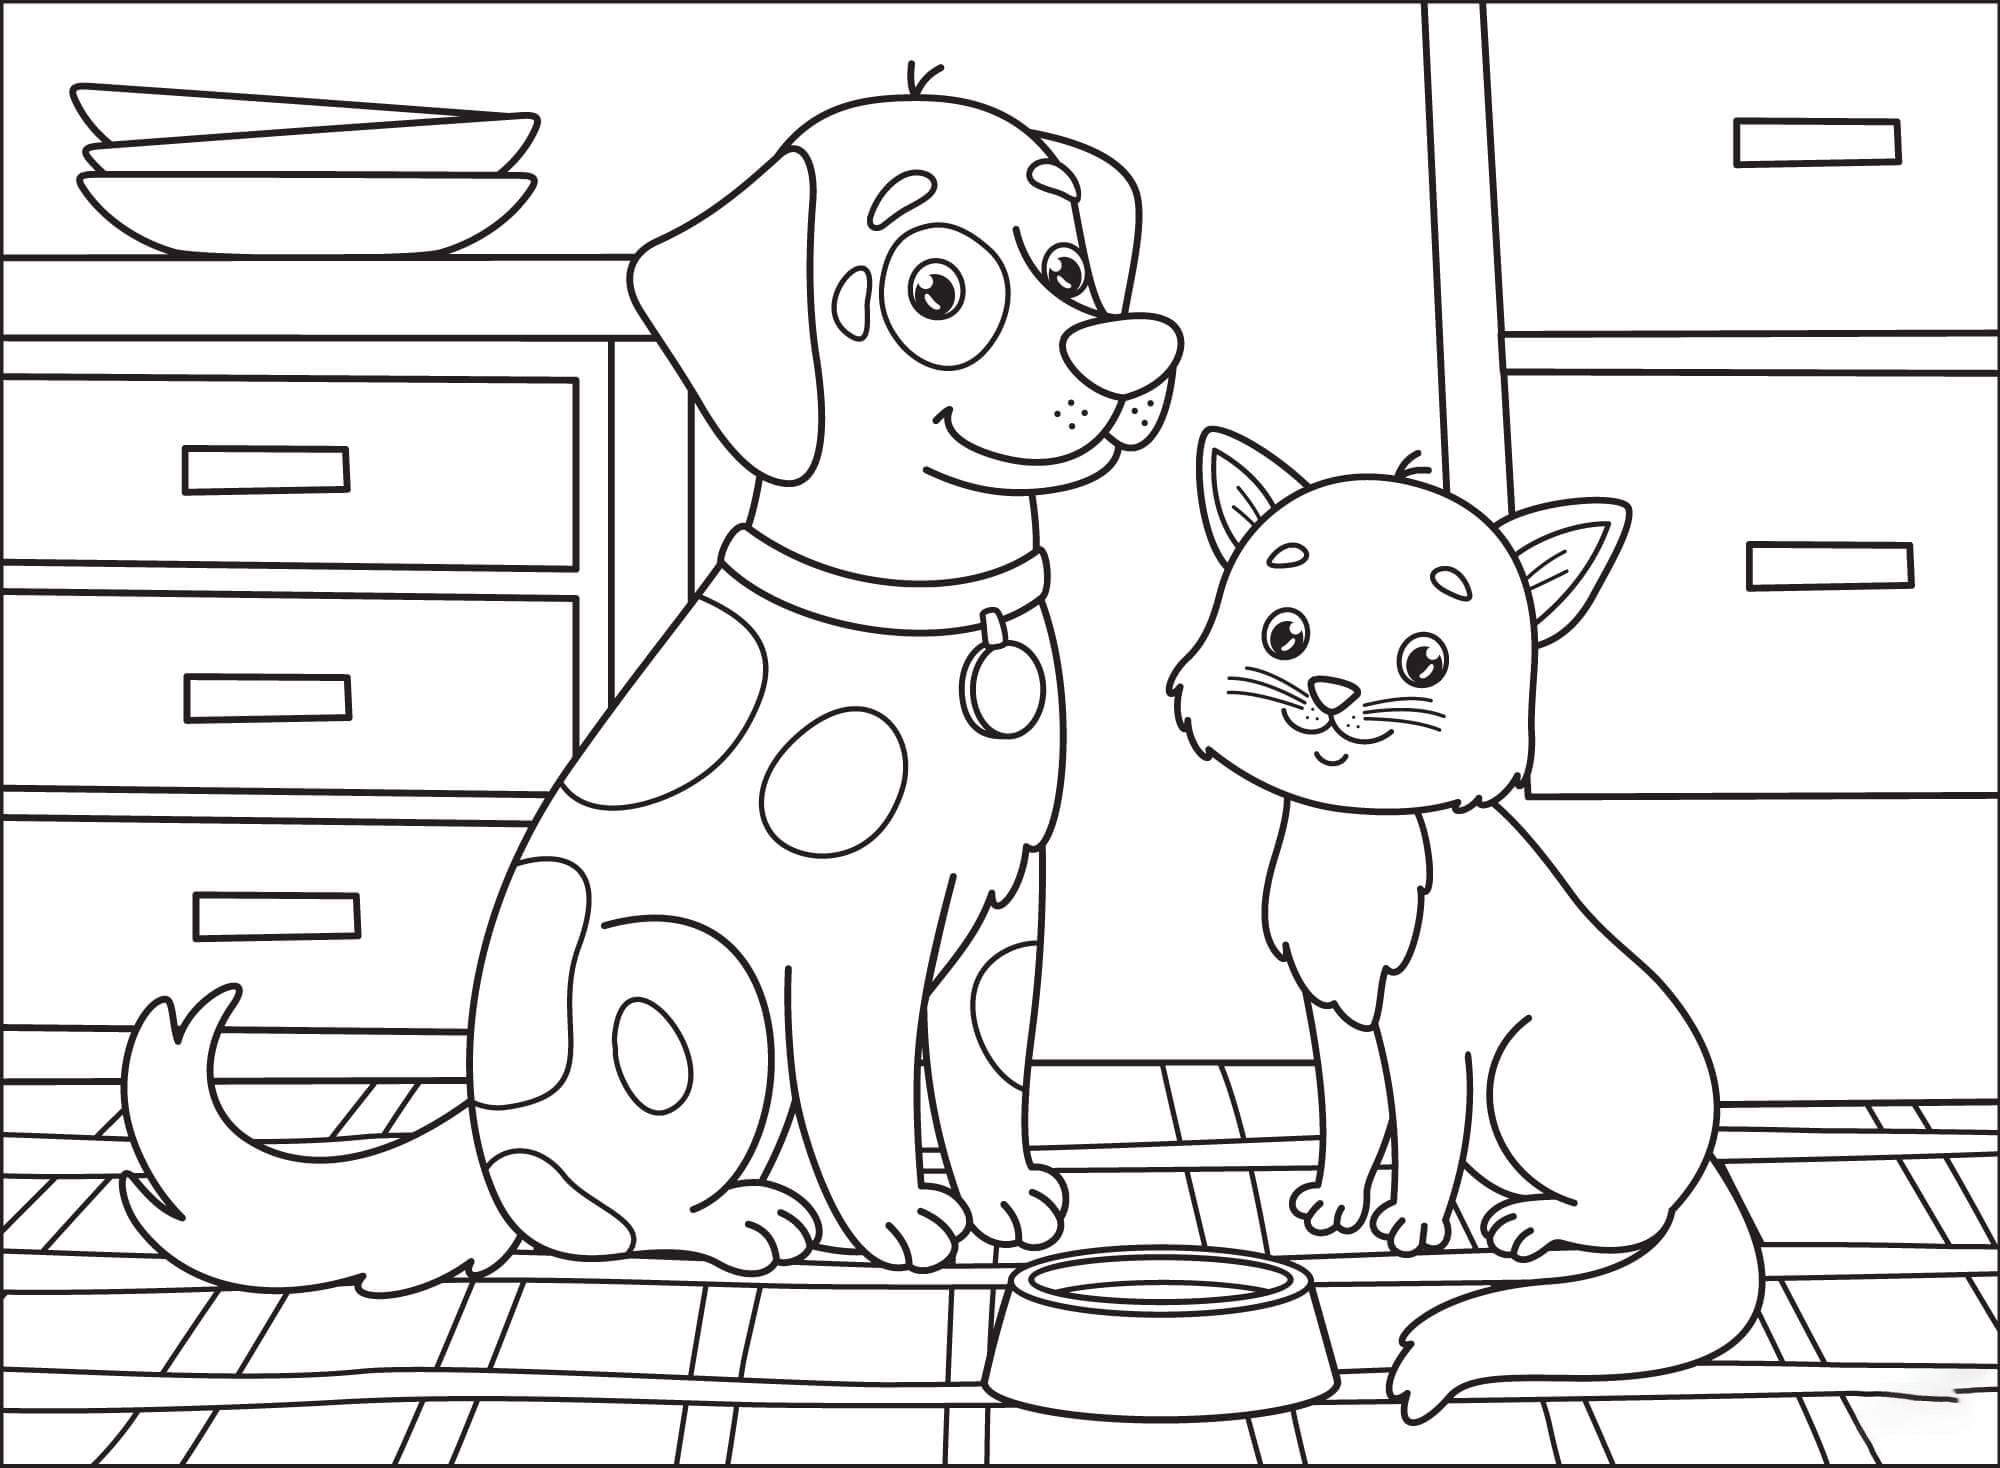 cat-dog-cartoon-coloring-pages-coloring-pages